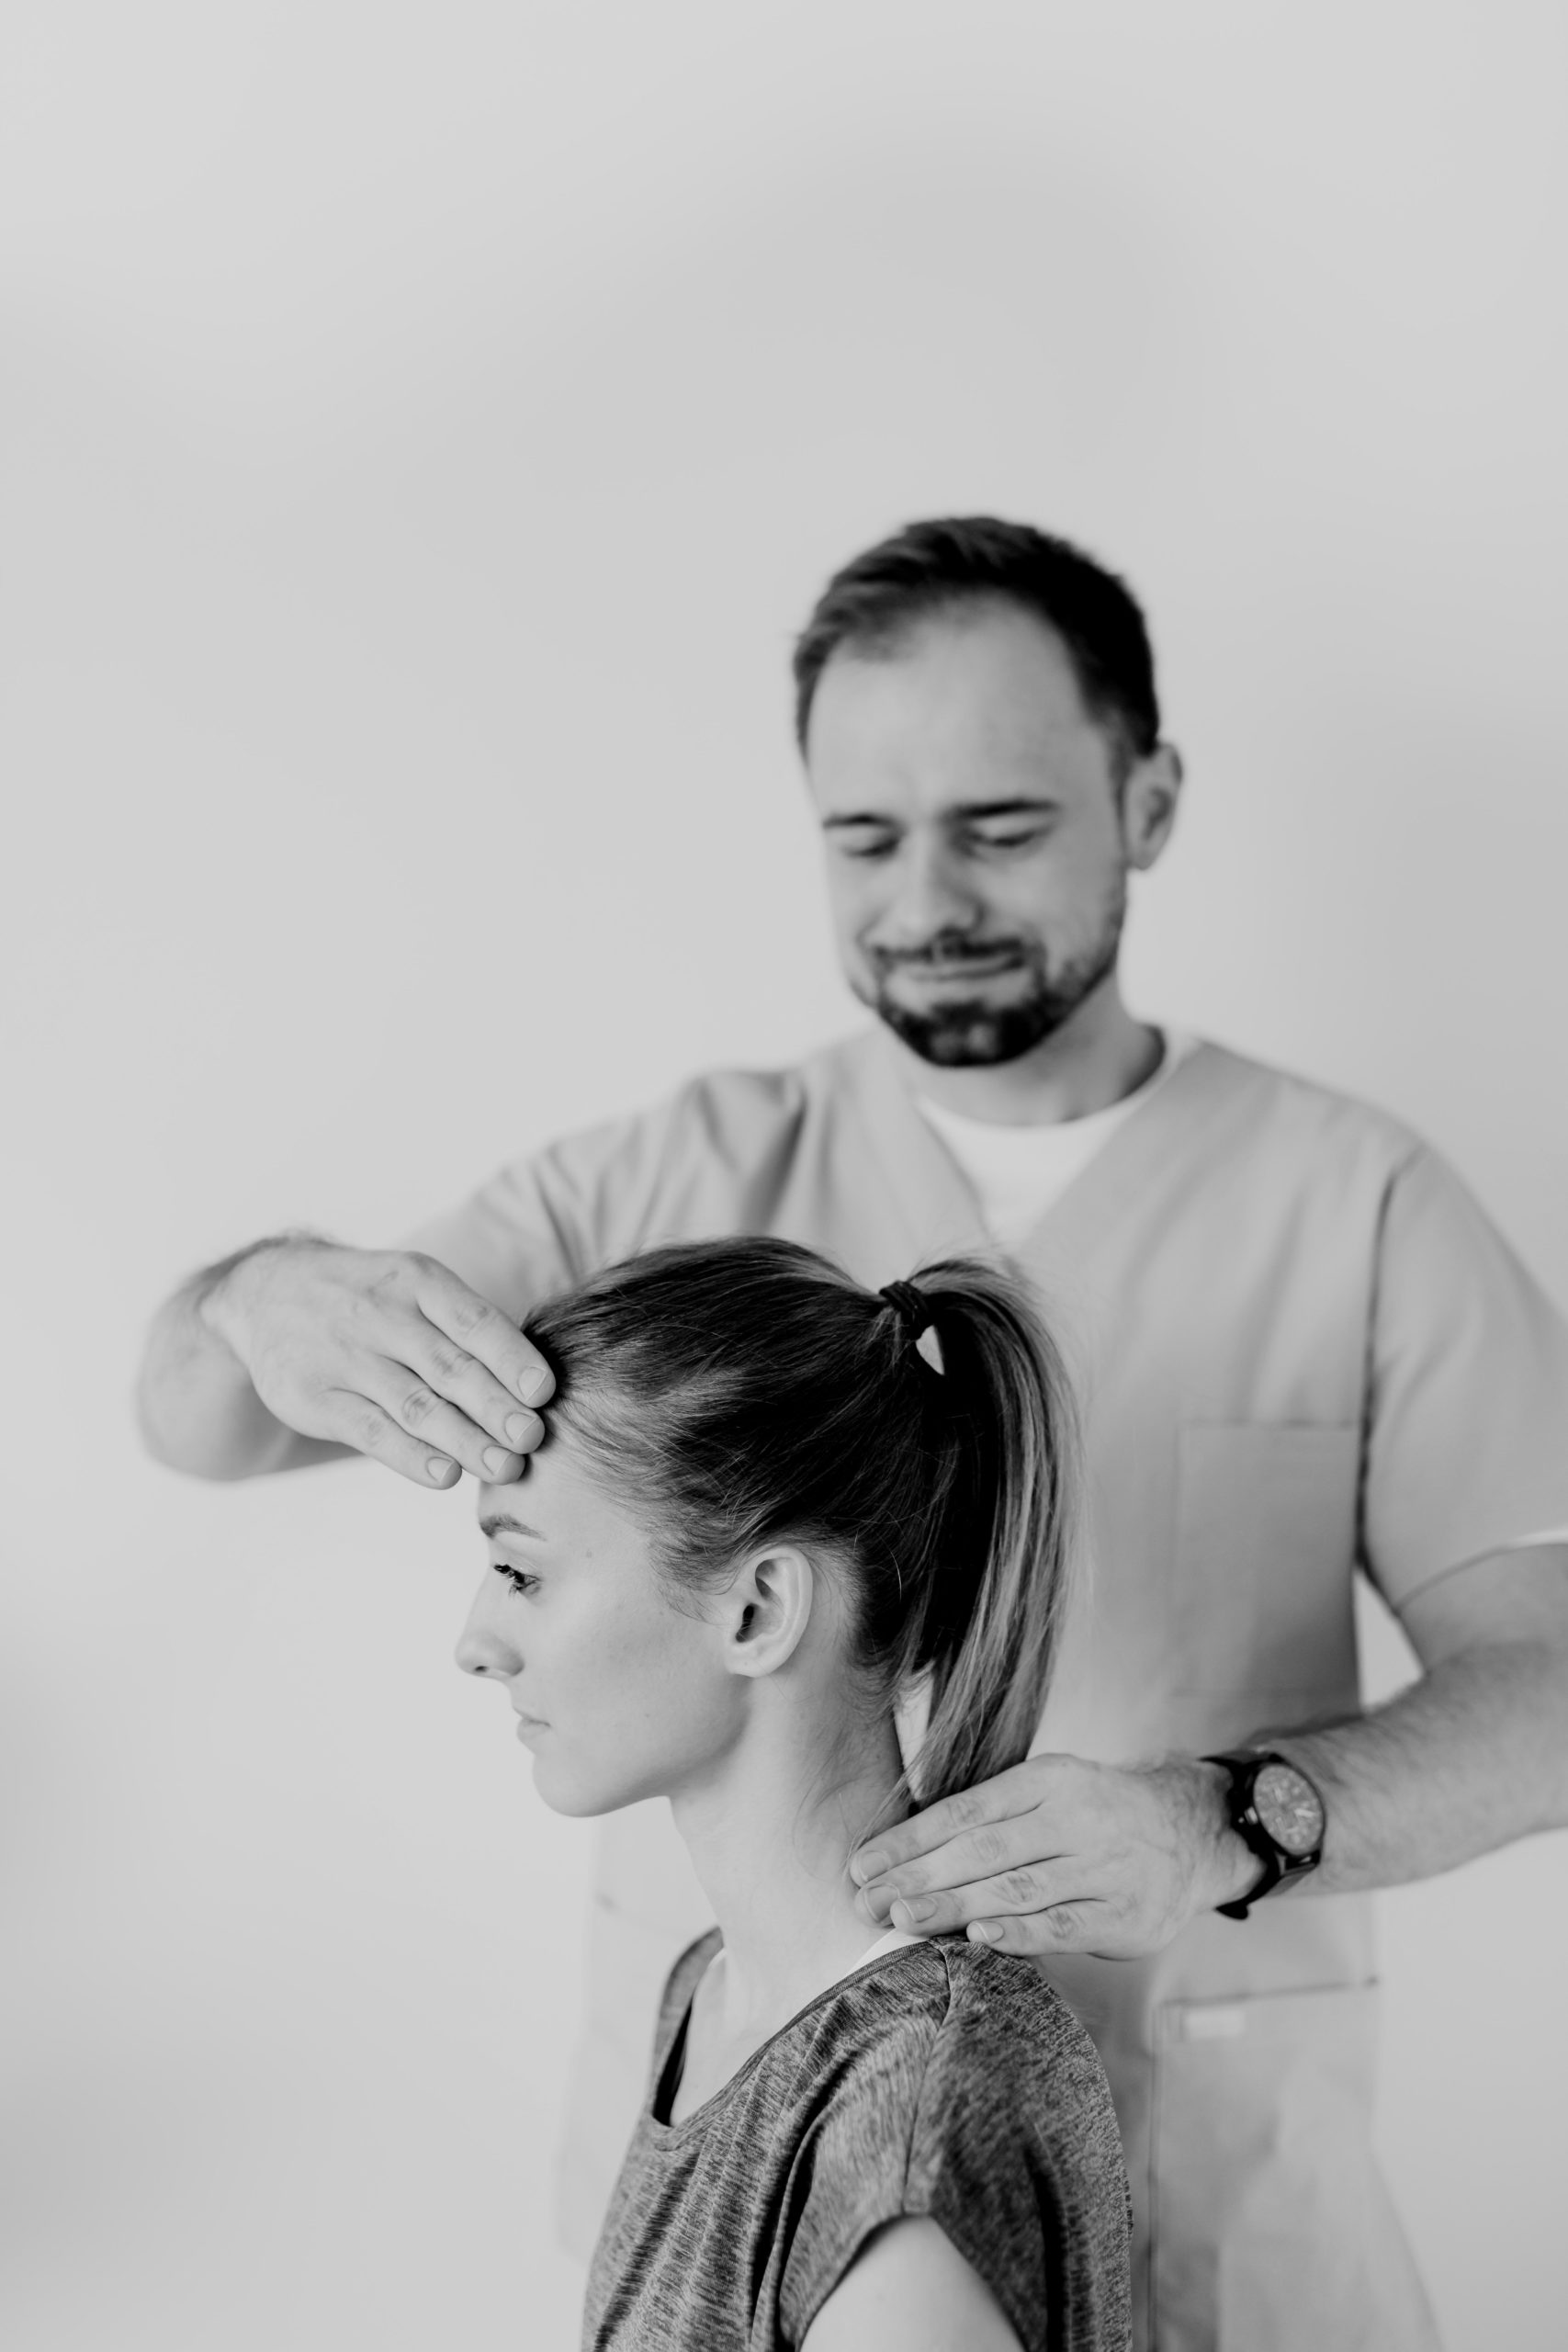 massage therapist standing next to sitting woman touching her head and helping her start working out after an injury by giving her a massage